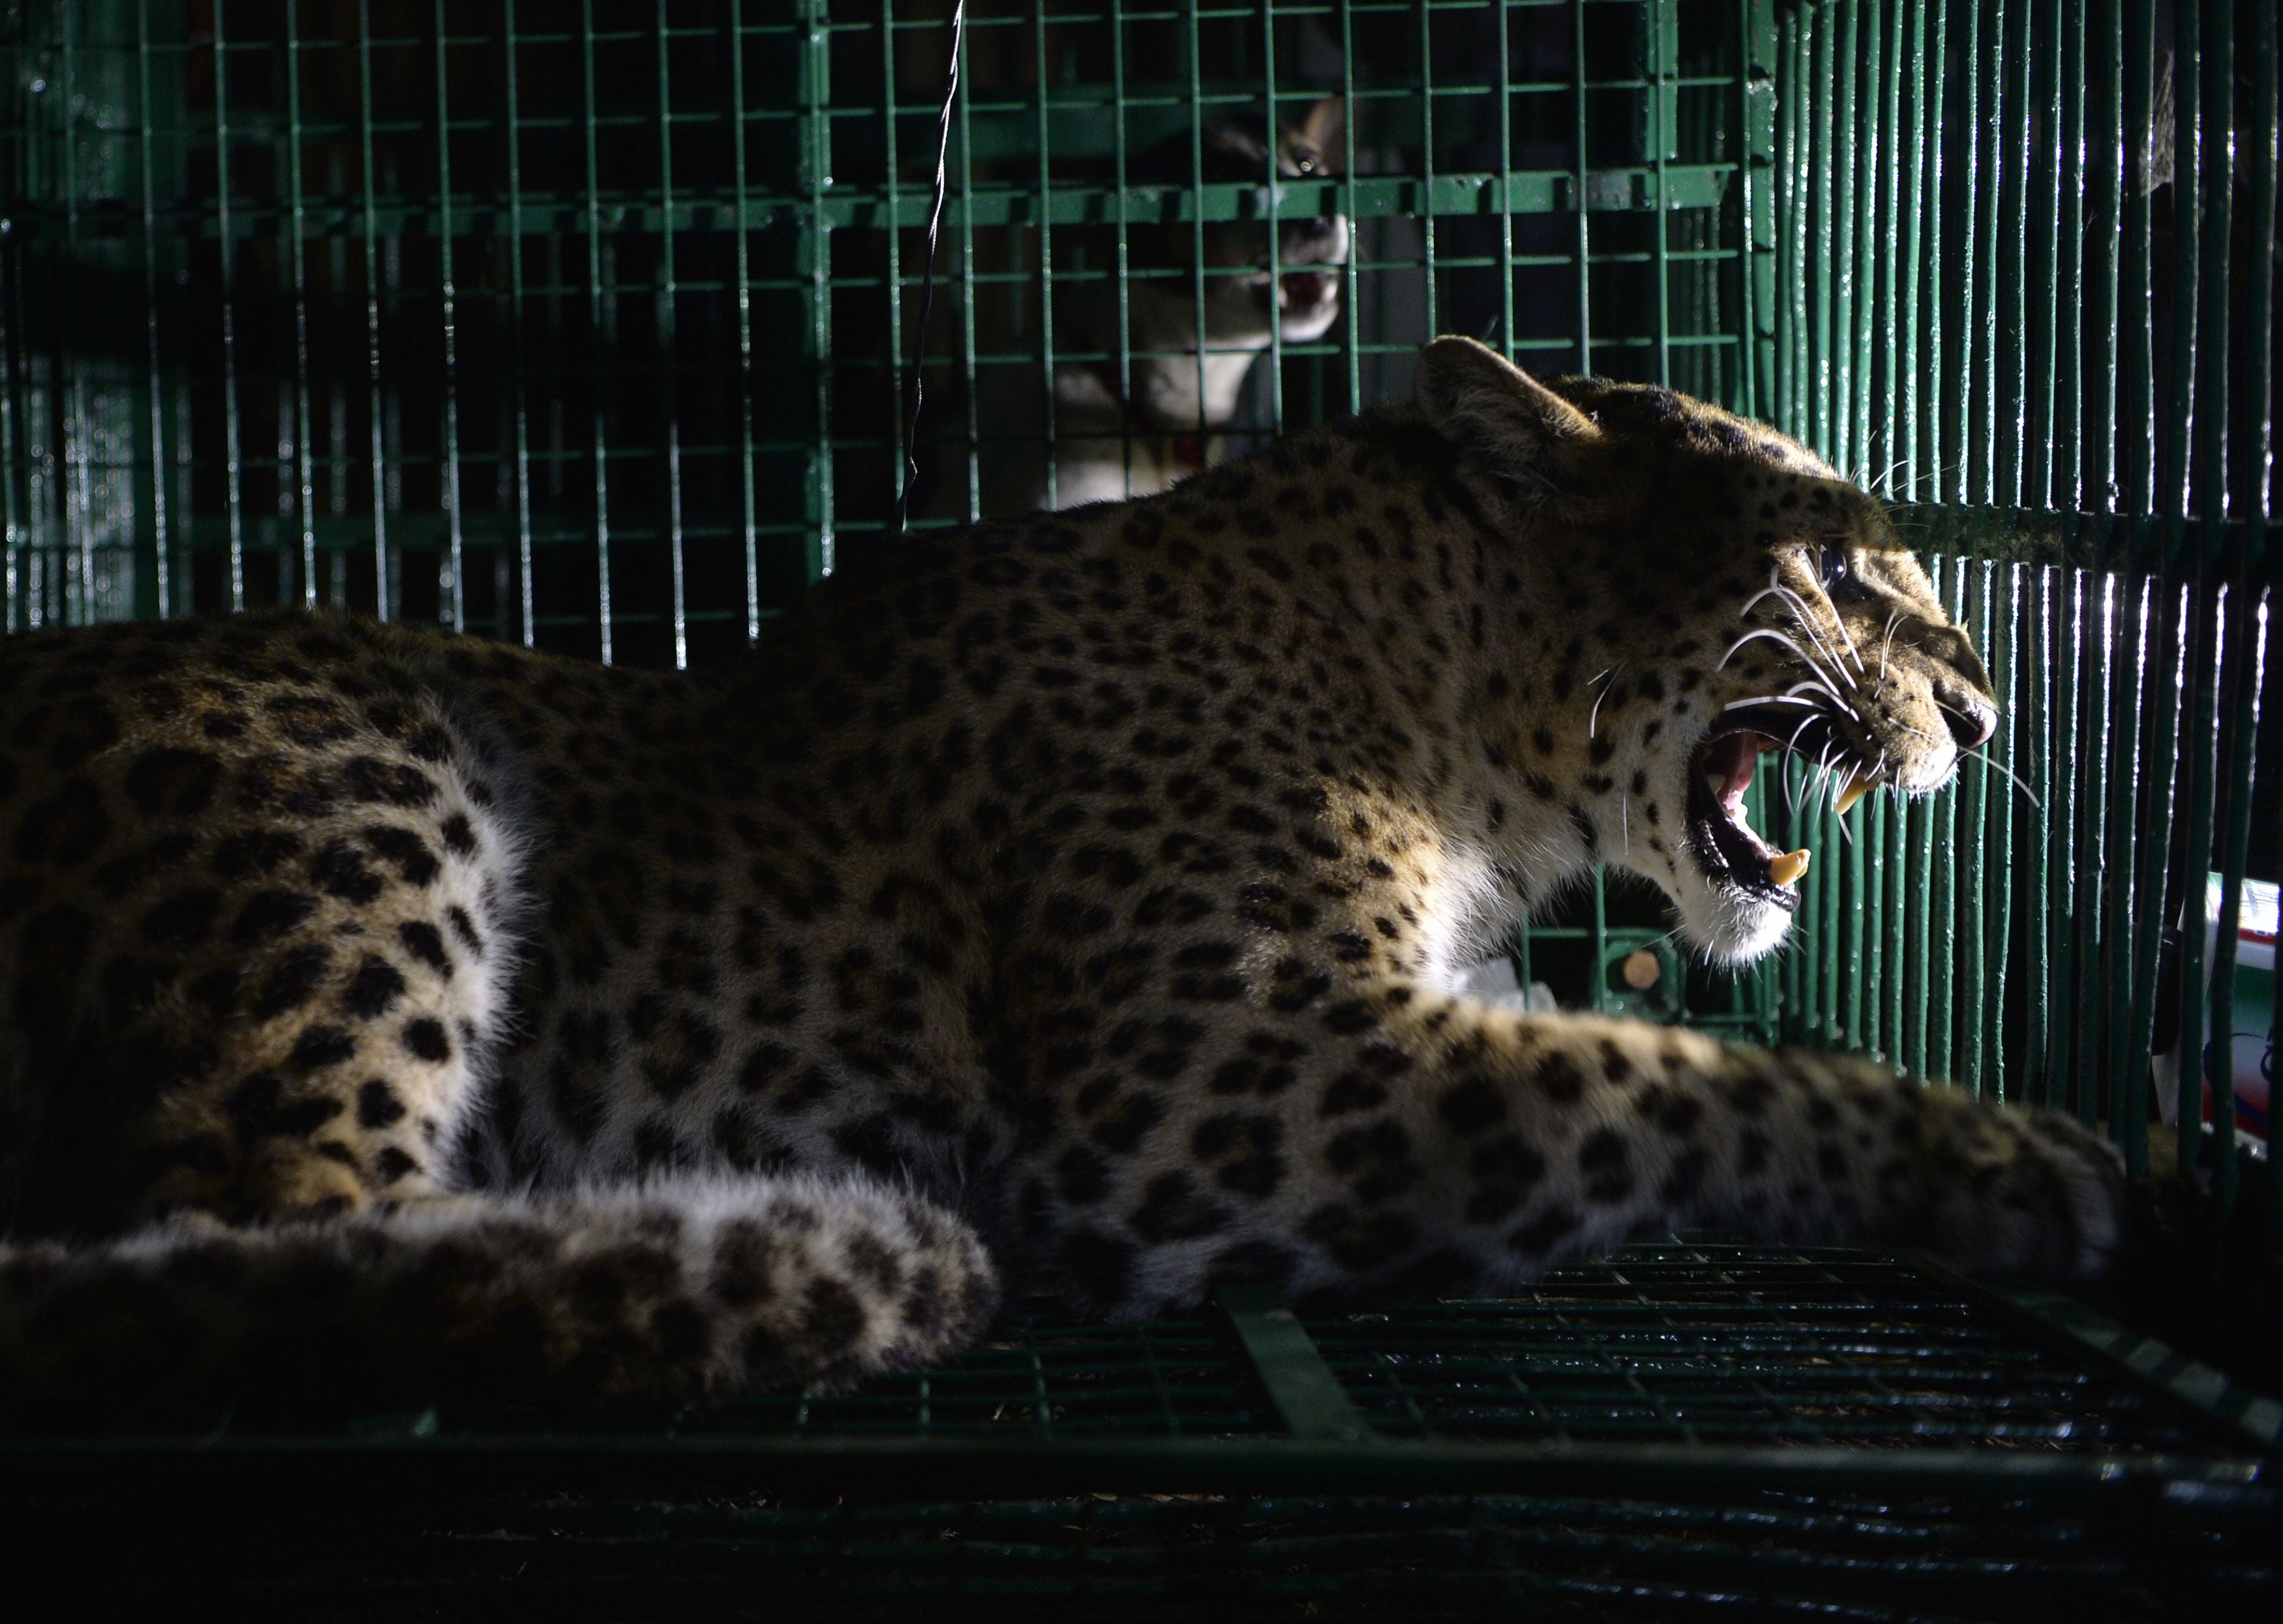 The leopard was captured after being shot by tranquiliser guns and only taken in control by the wildlife officials